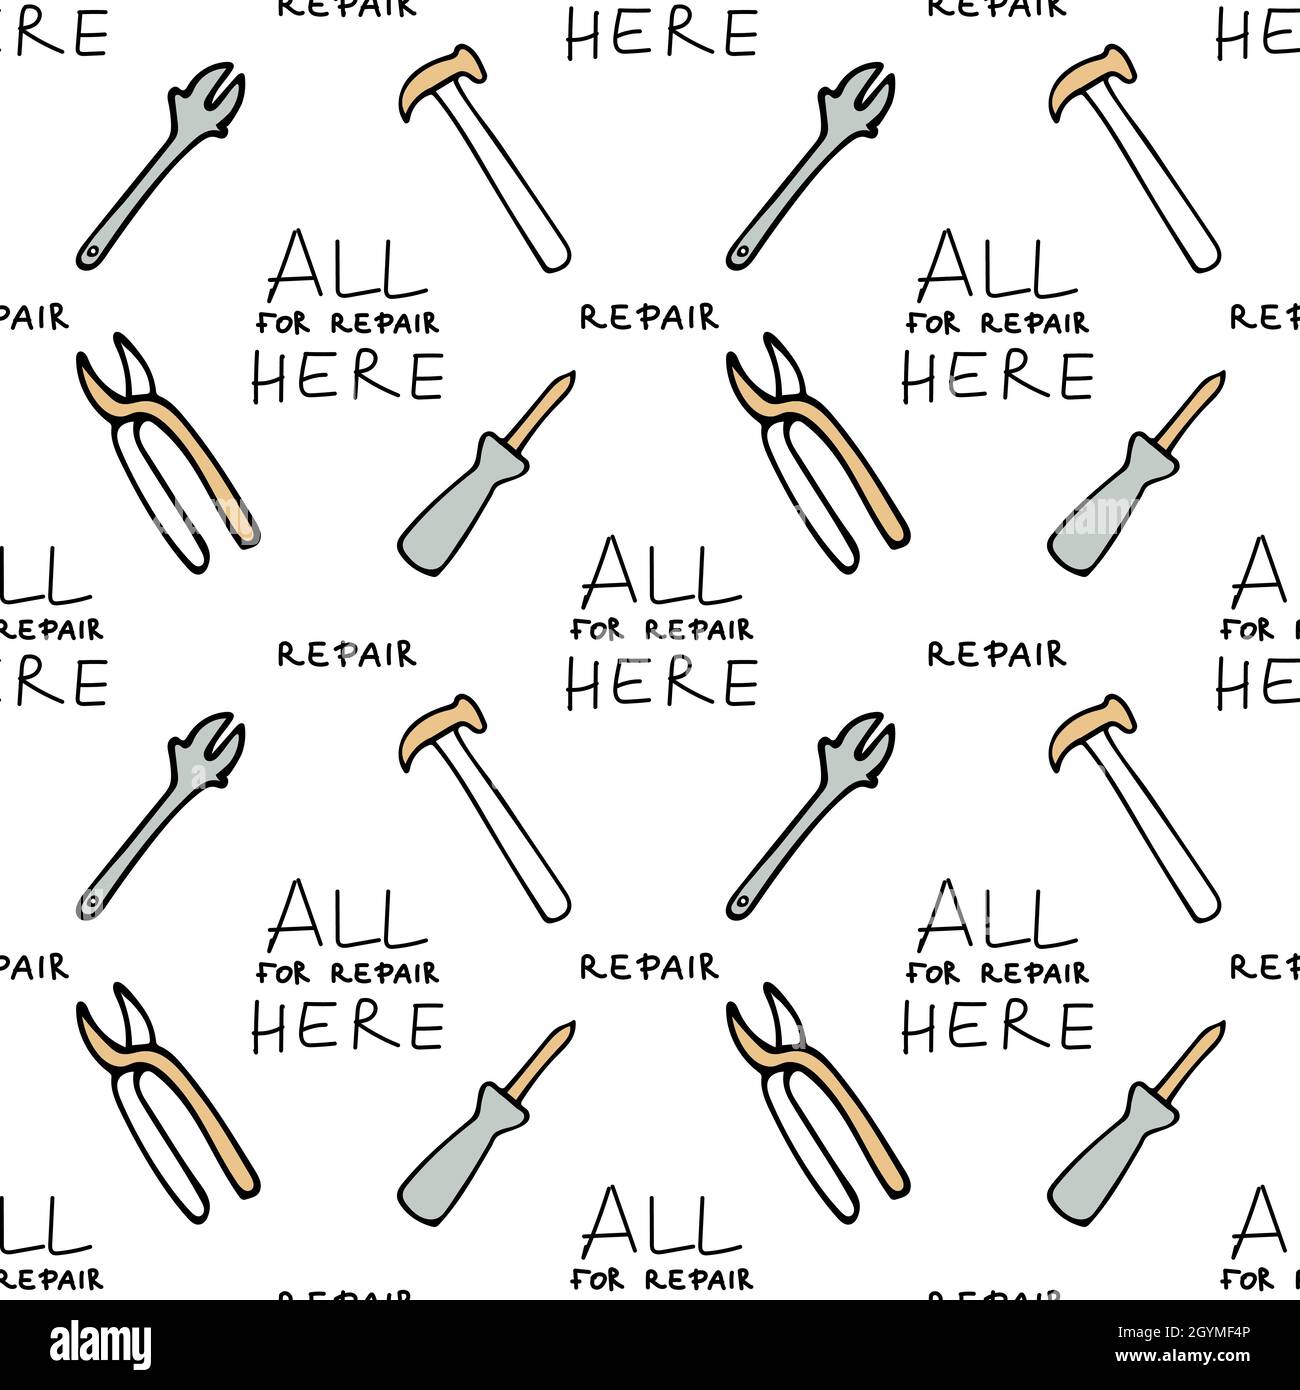 Seamless pattern with repair tools, pliers, adjustable wrench, hammer, screwdriver. Lettering All for repair here. Stock Vector